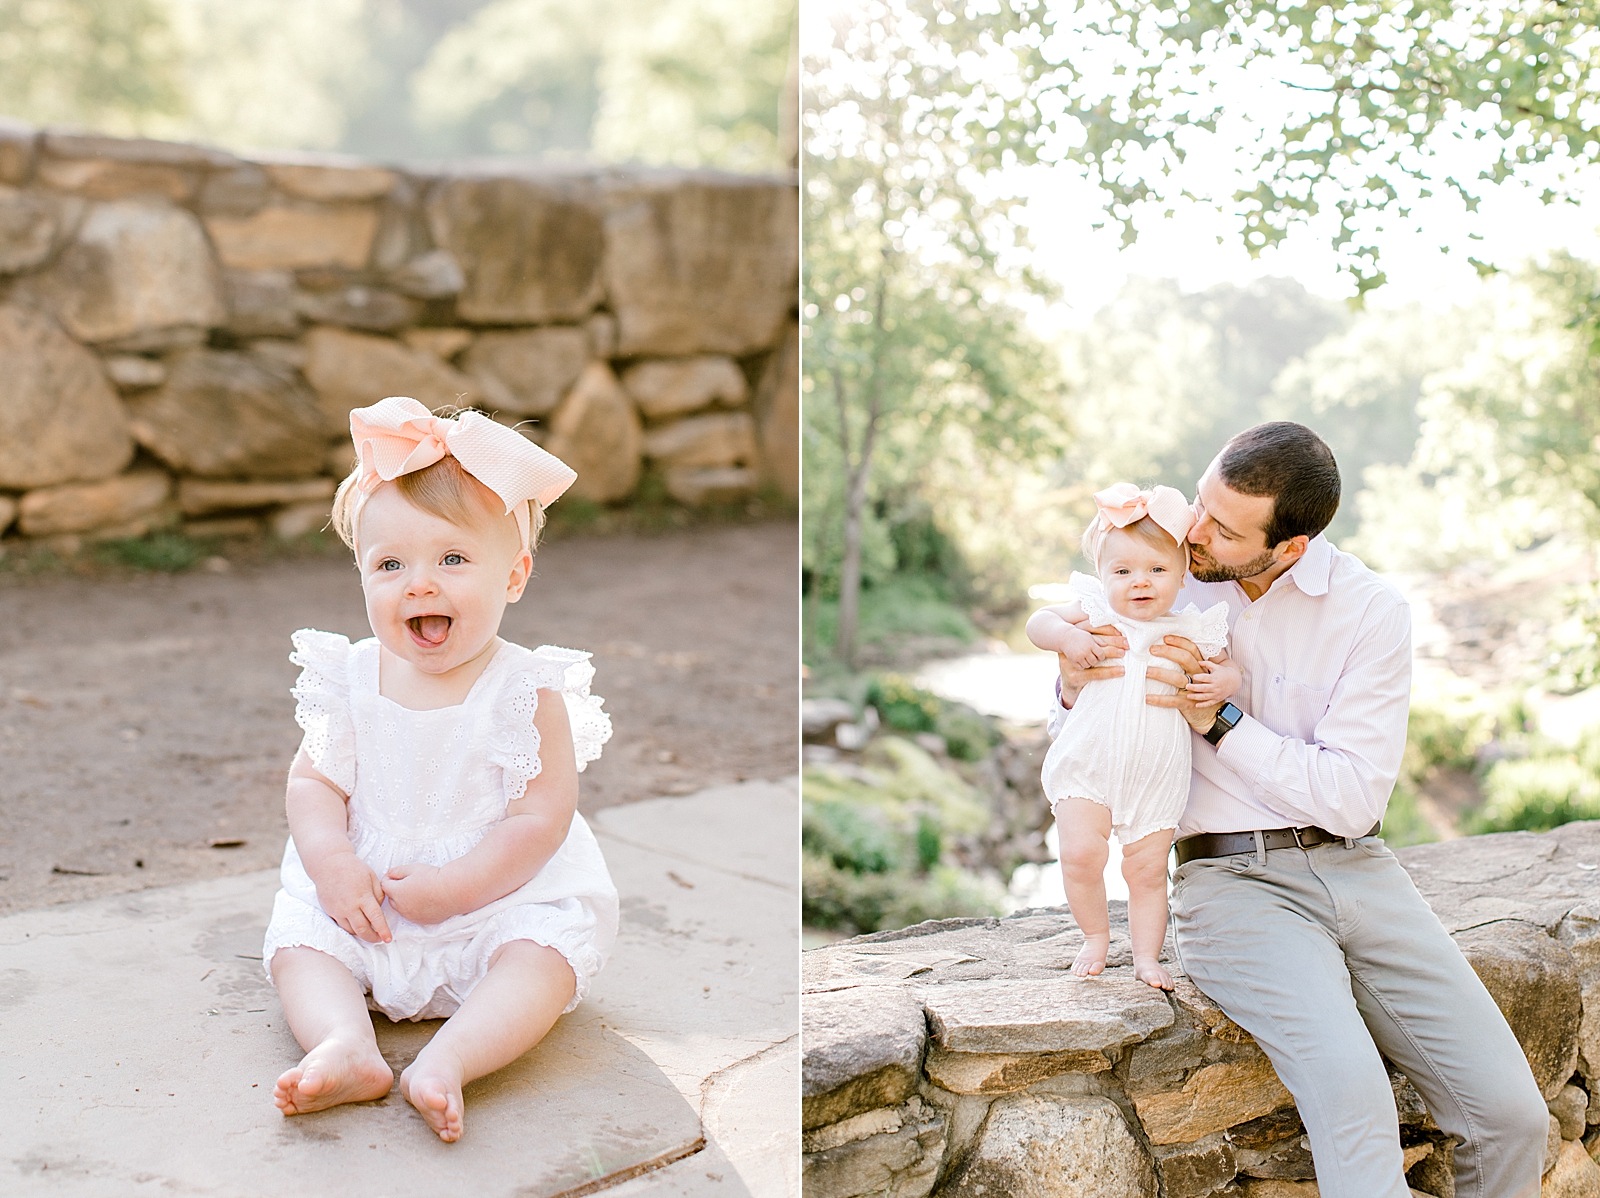 Natural Light Lifestyle Photography Greenville SC